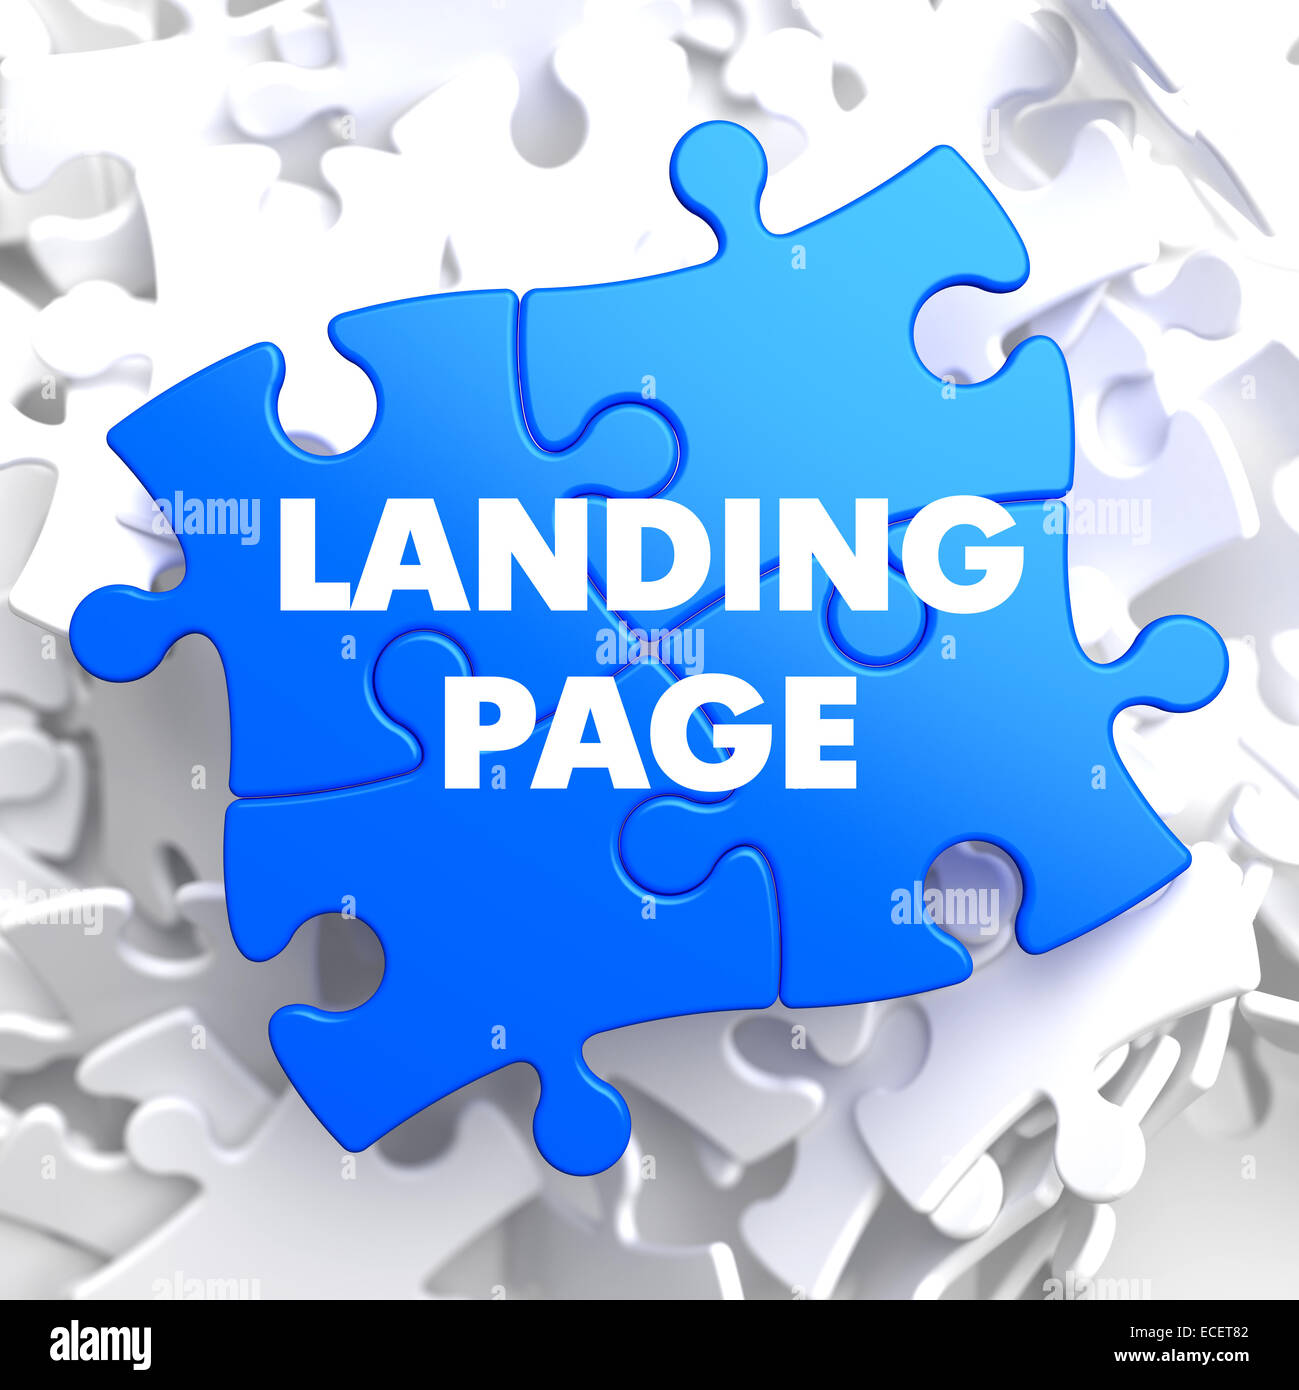 Landing Page on Blue Puzzle. Stock Photo